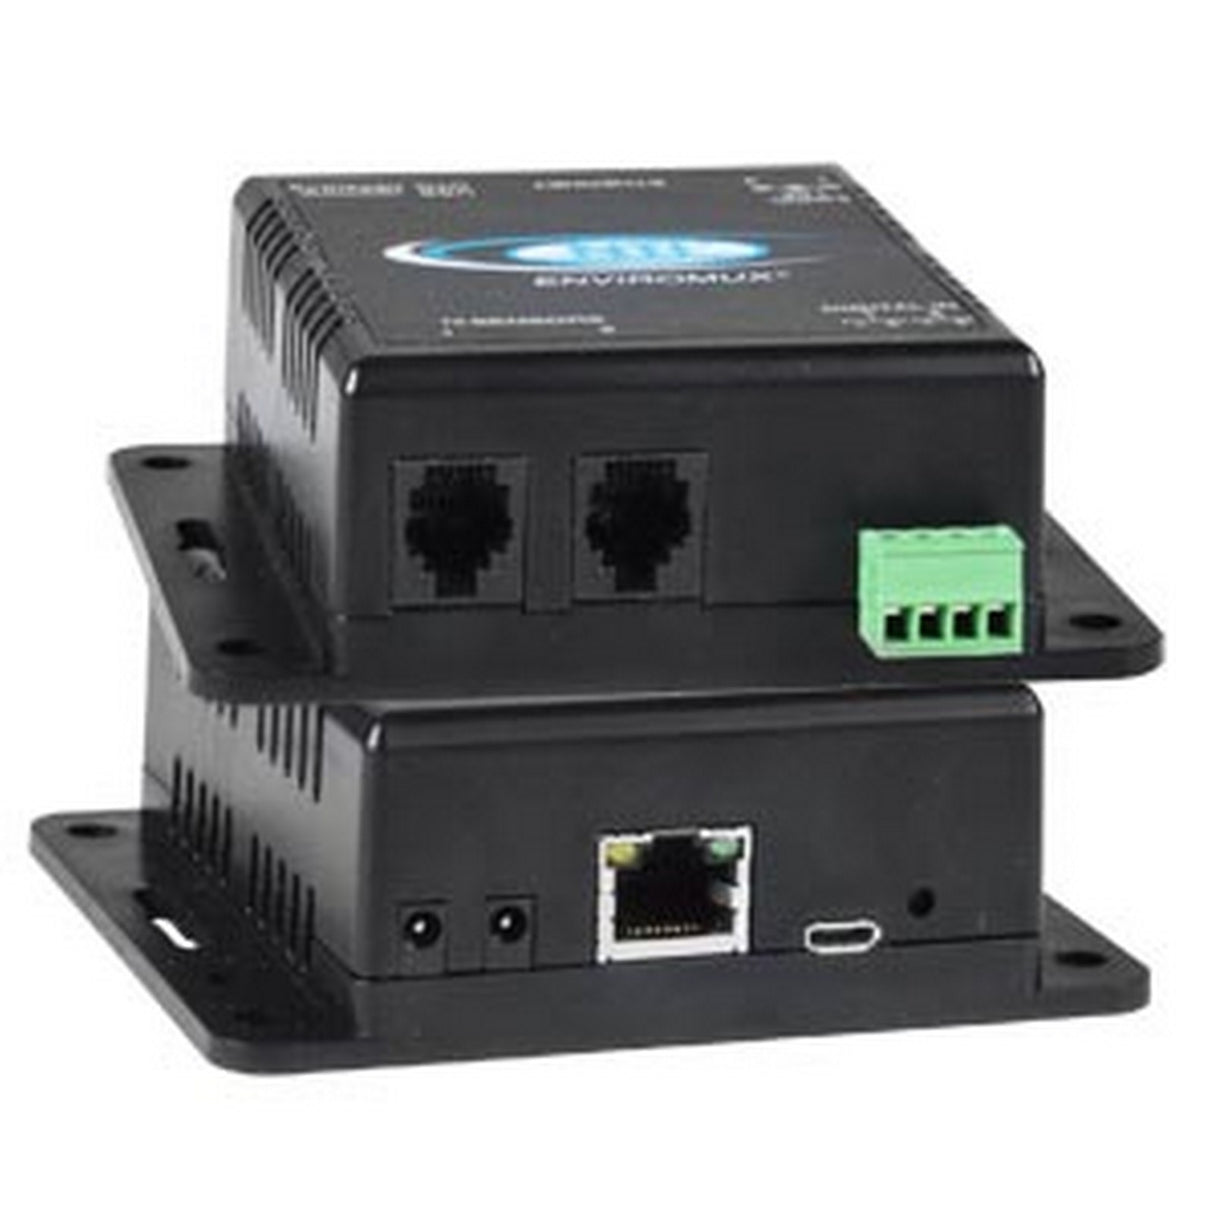 NTI E-1WP ENVIROMUX Environment Monitoring System with 1-Wire Sensor Interface, Power over Ethernet, Power Supply Not Included